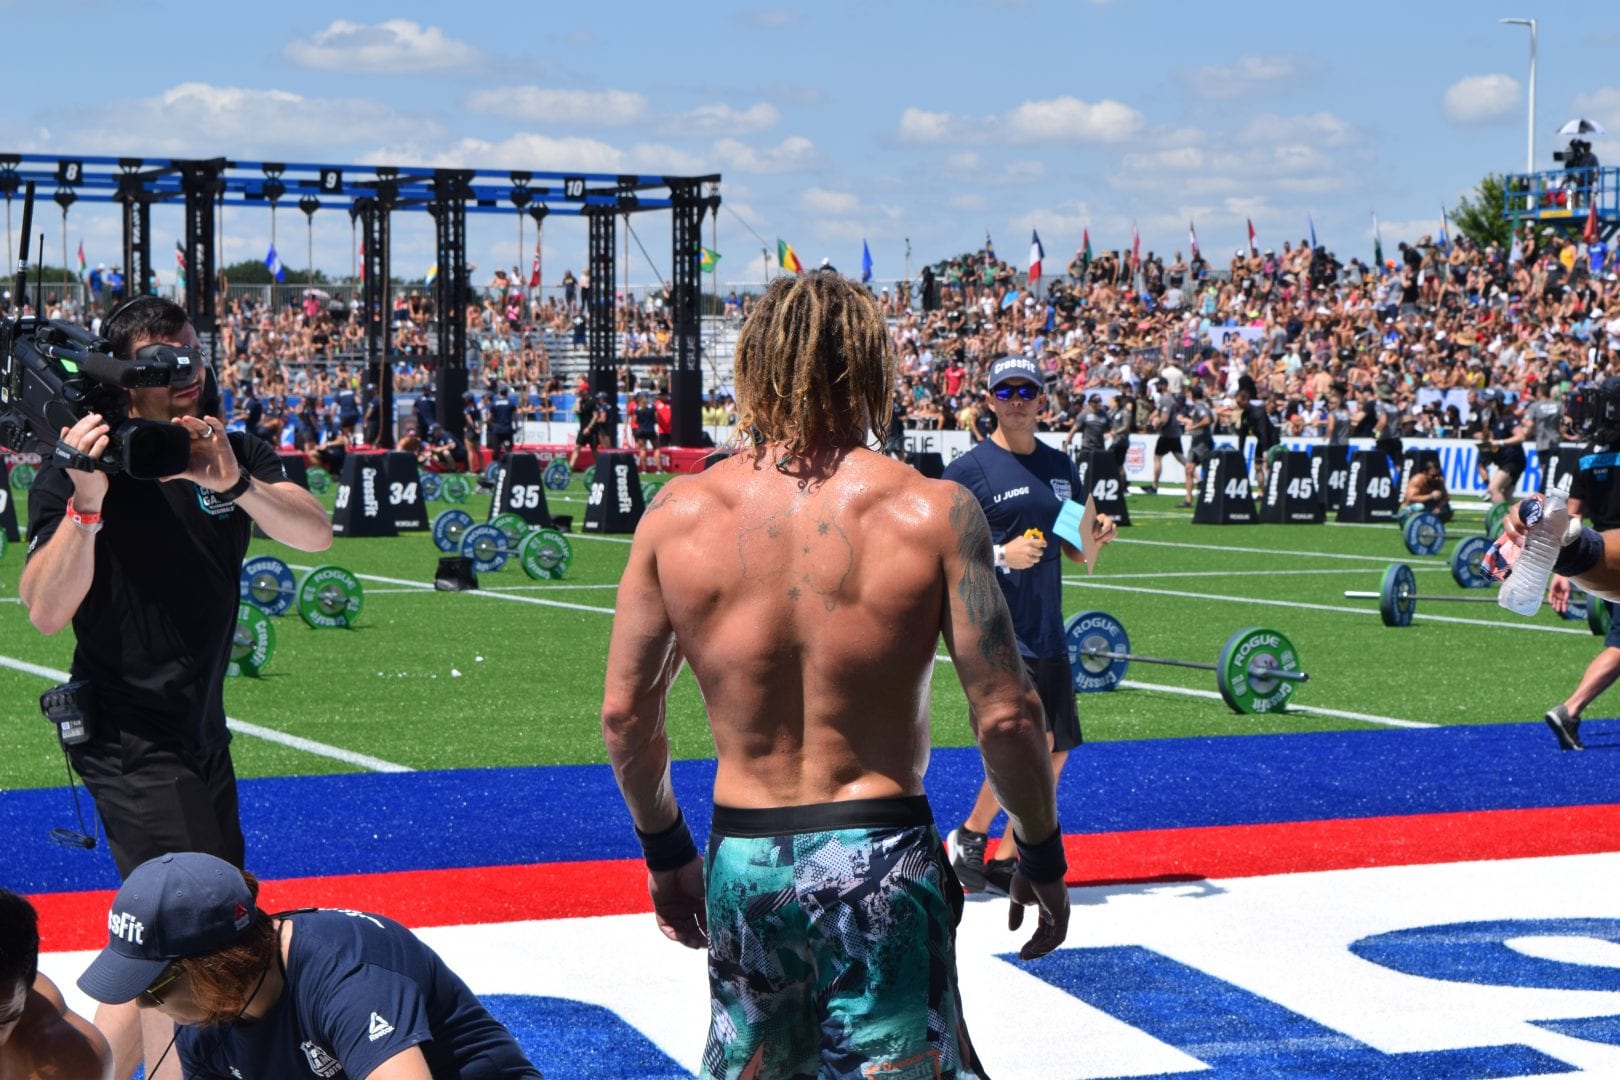 James Newbury watches other competitors finish the first event of the 2019 CrossFit Games